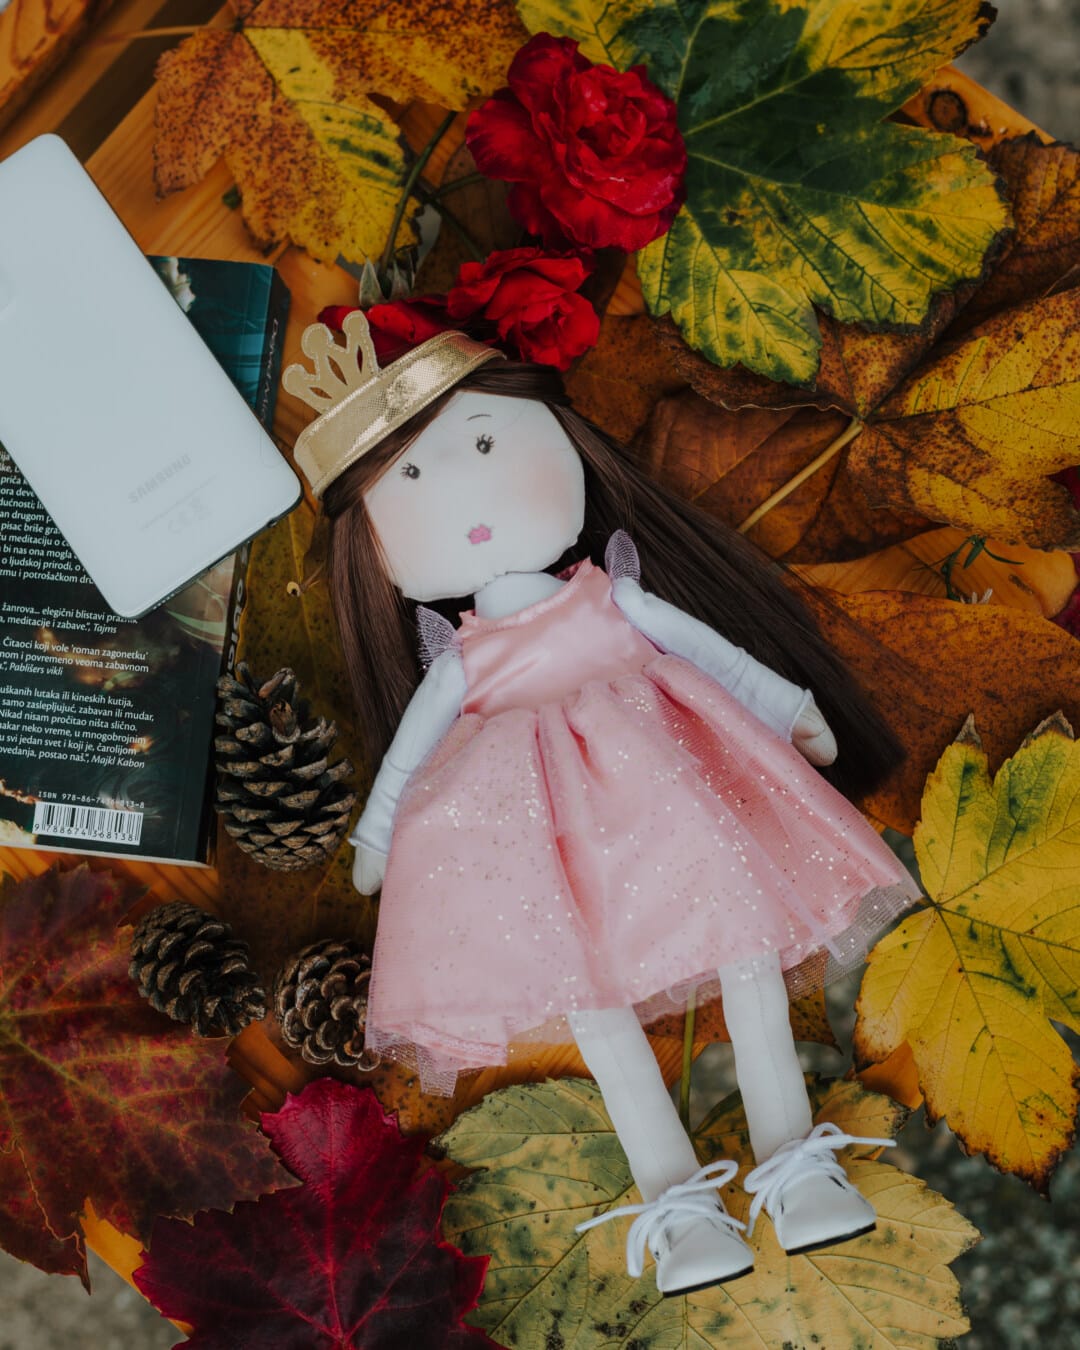 brunette, toy, doll, princess, gifts, thanksgiving, traditional, still life, gift, present